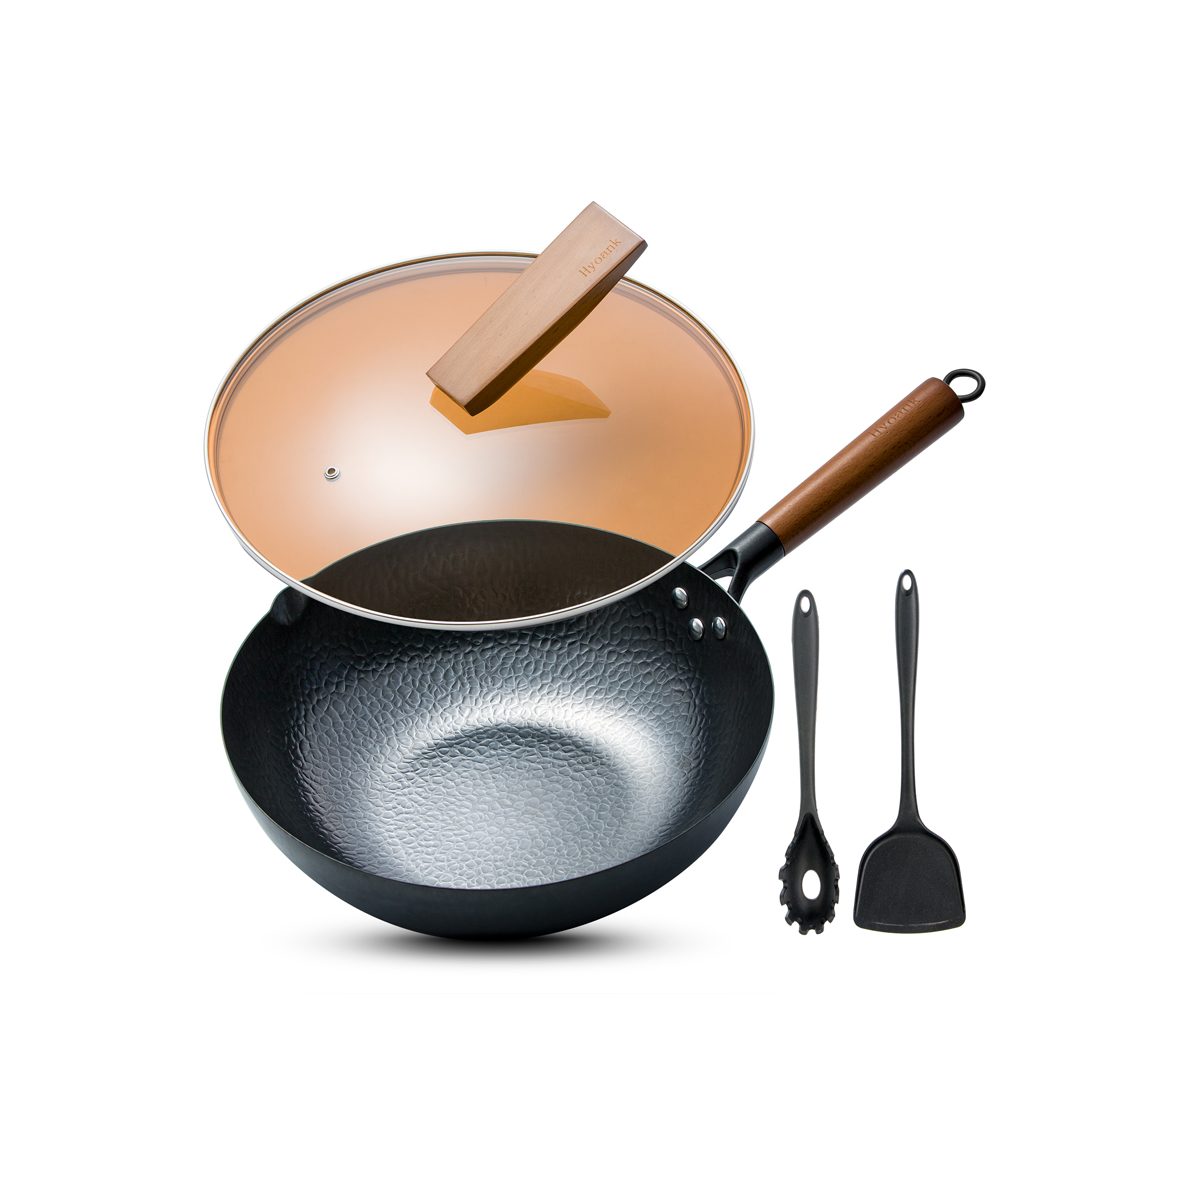 Bielmeier Wok Pan 12.5 Carbon Steel Wok with Cookware Accessories Wok with Lid Suits for all Stoves Flat Bottom Wok Woks and Stir Fry Pans with lid 